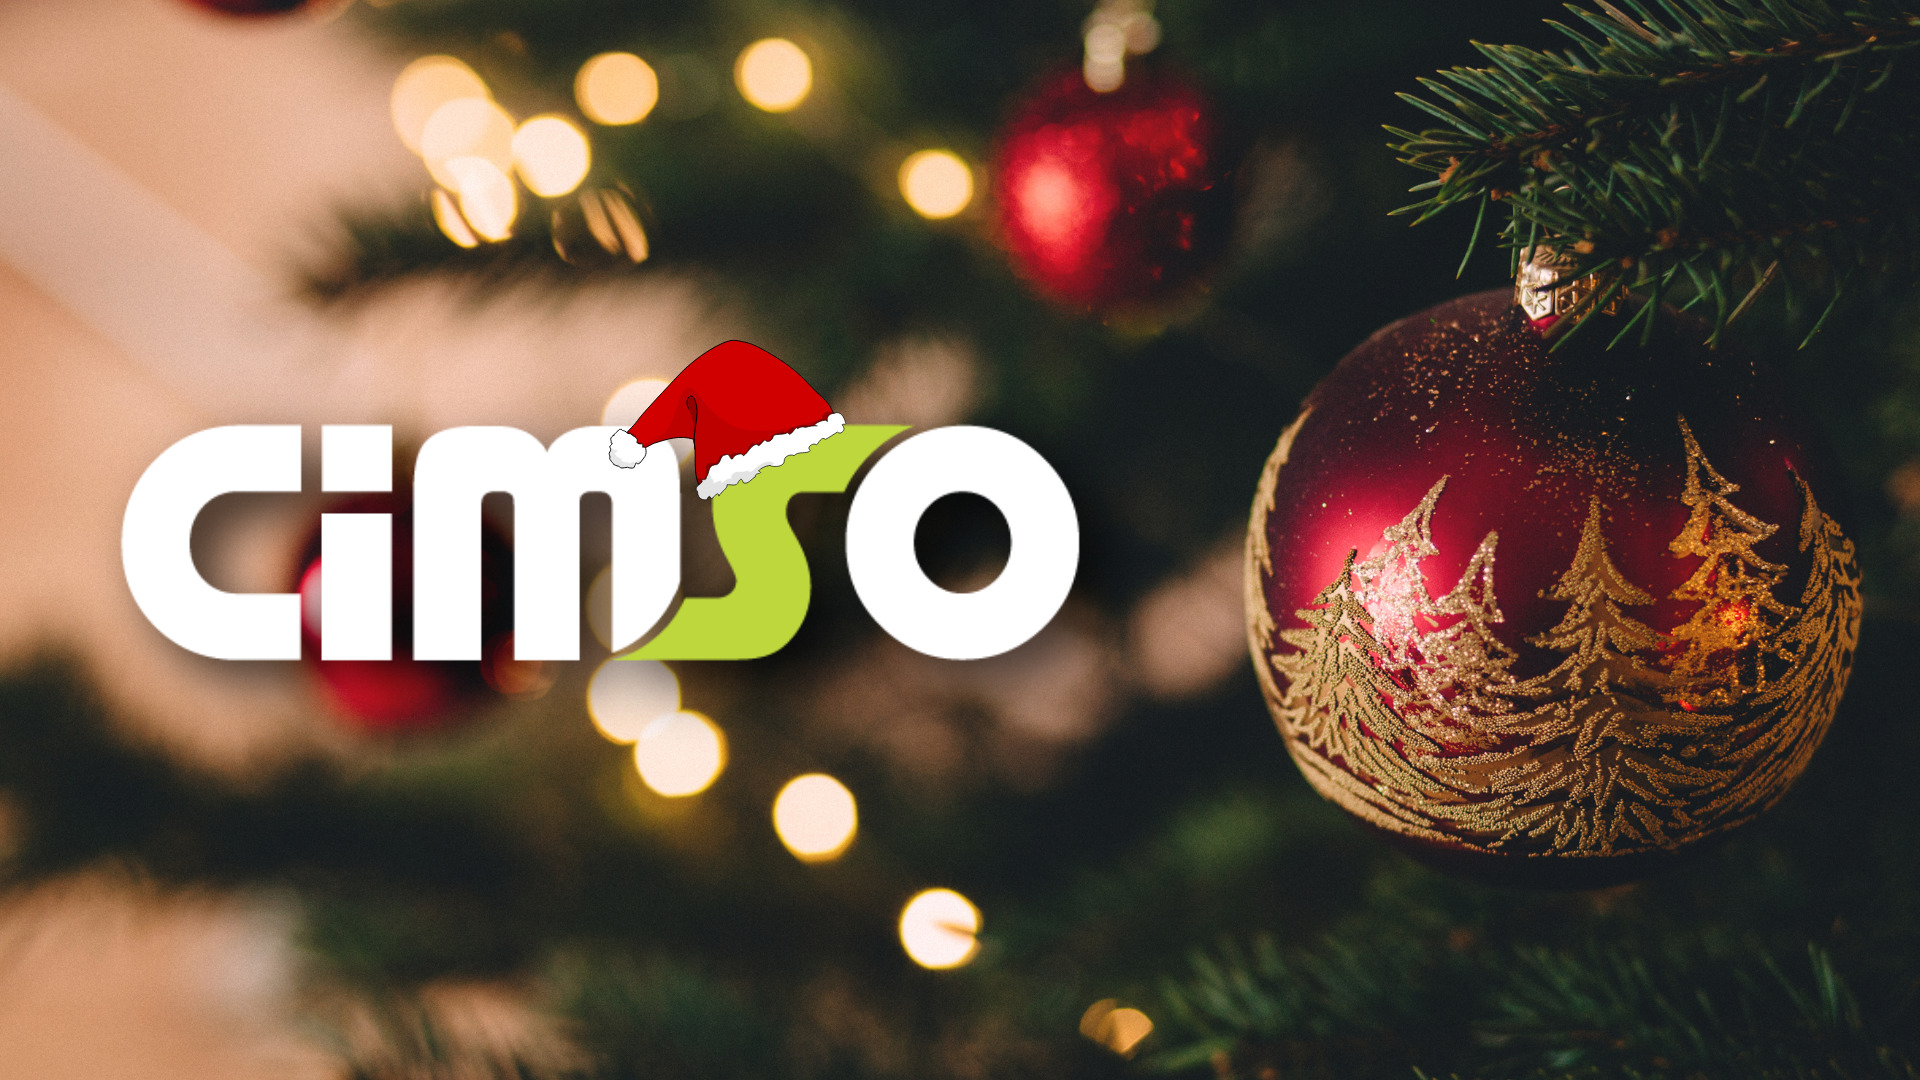 Featured image for “Happy Holidays from CiMSO!”